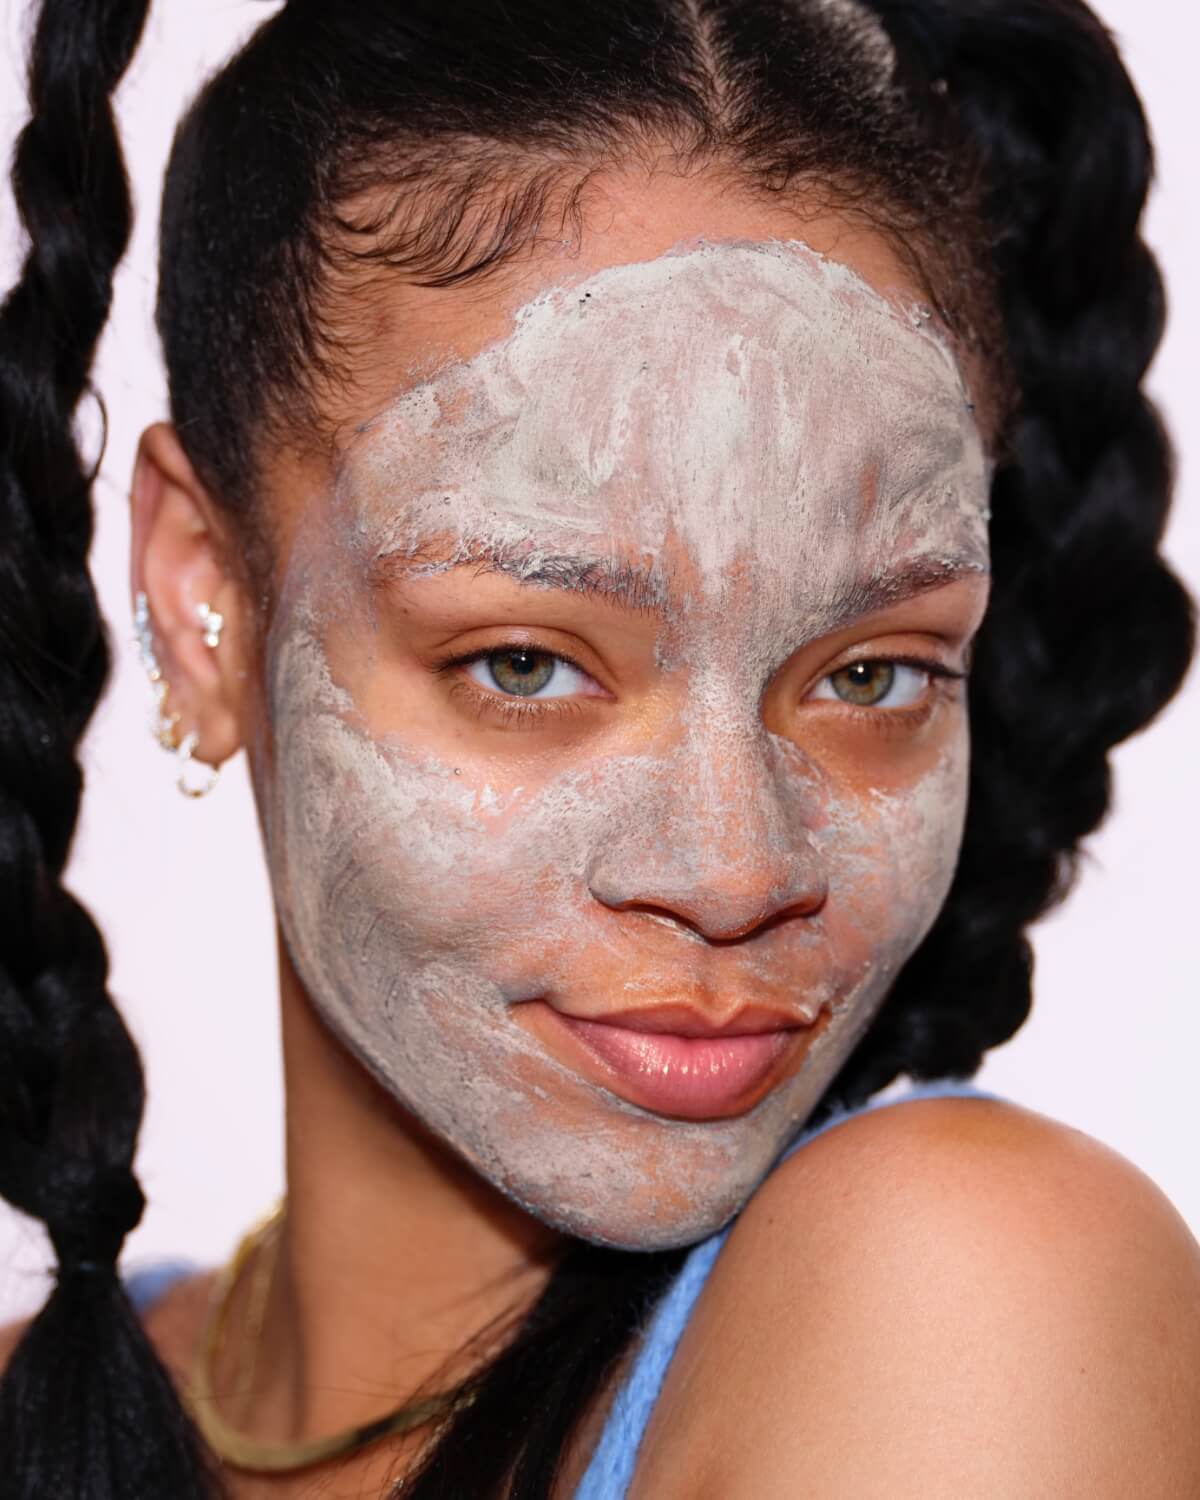 Cookies N Clean Whipped Clay Detox Face Mask